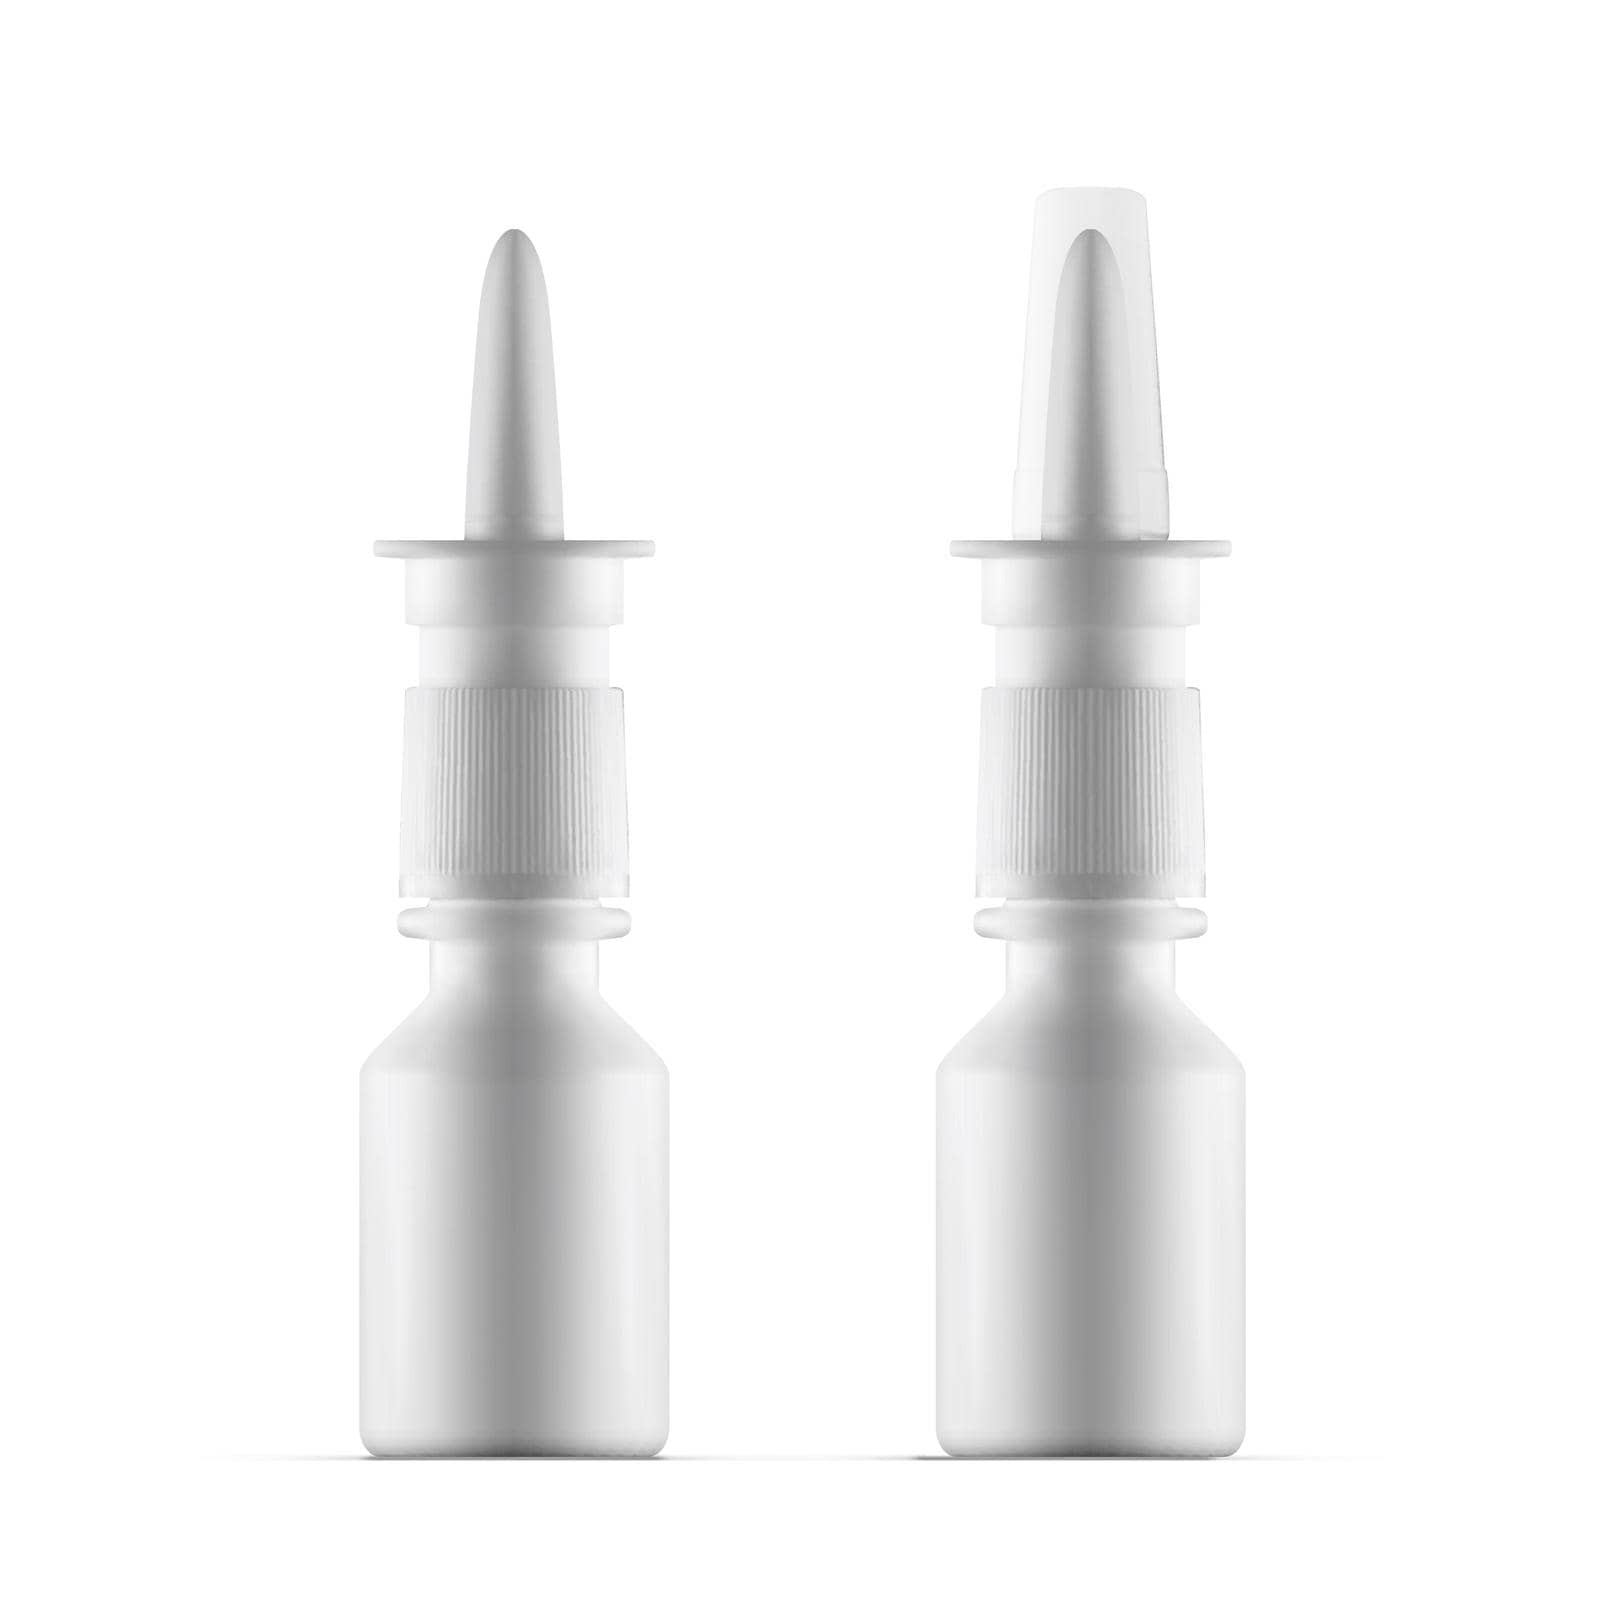 White Plastic Nasal Spray Bottle With Transparent Cap Template by VectorThings